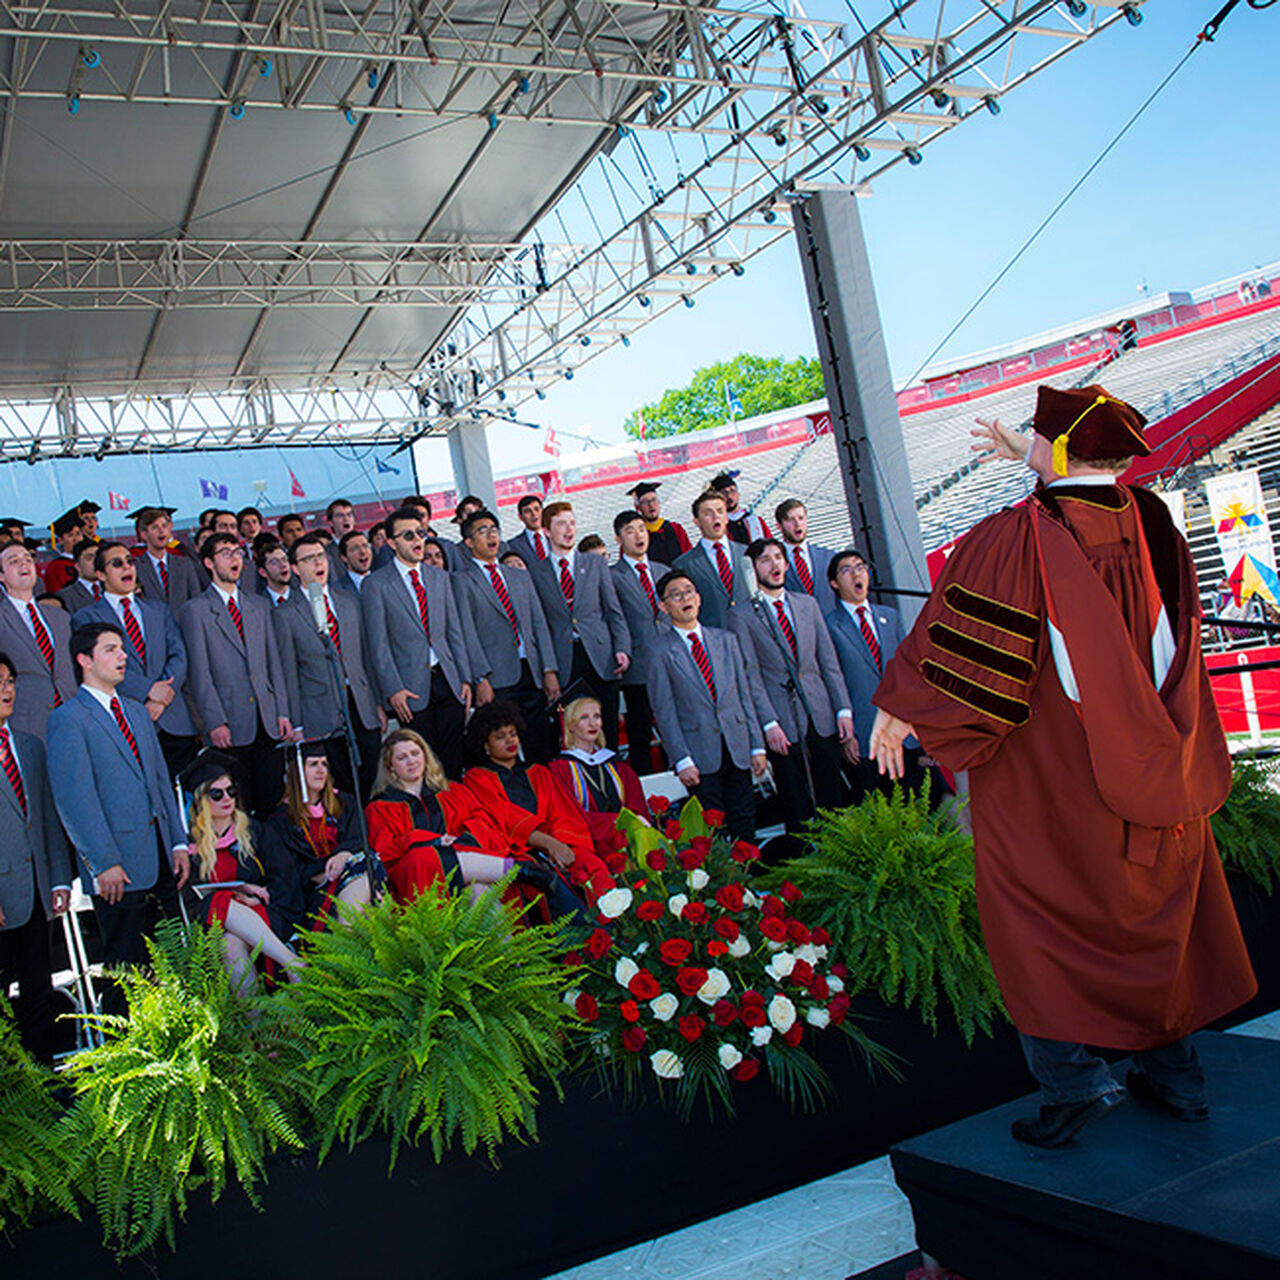 Glee Club singing on stage at Commencement image number 0